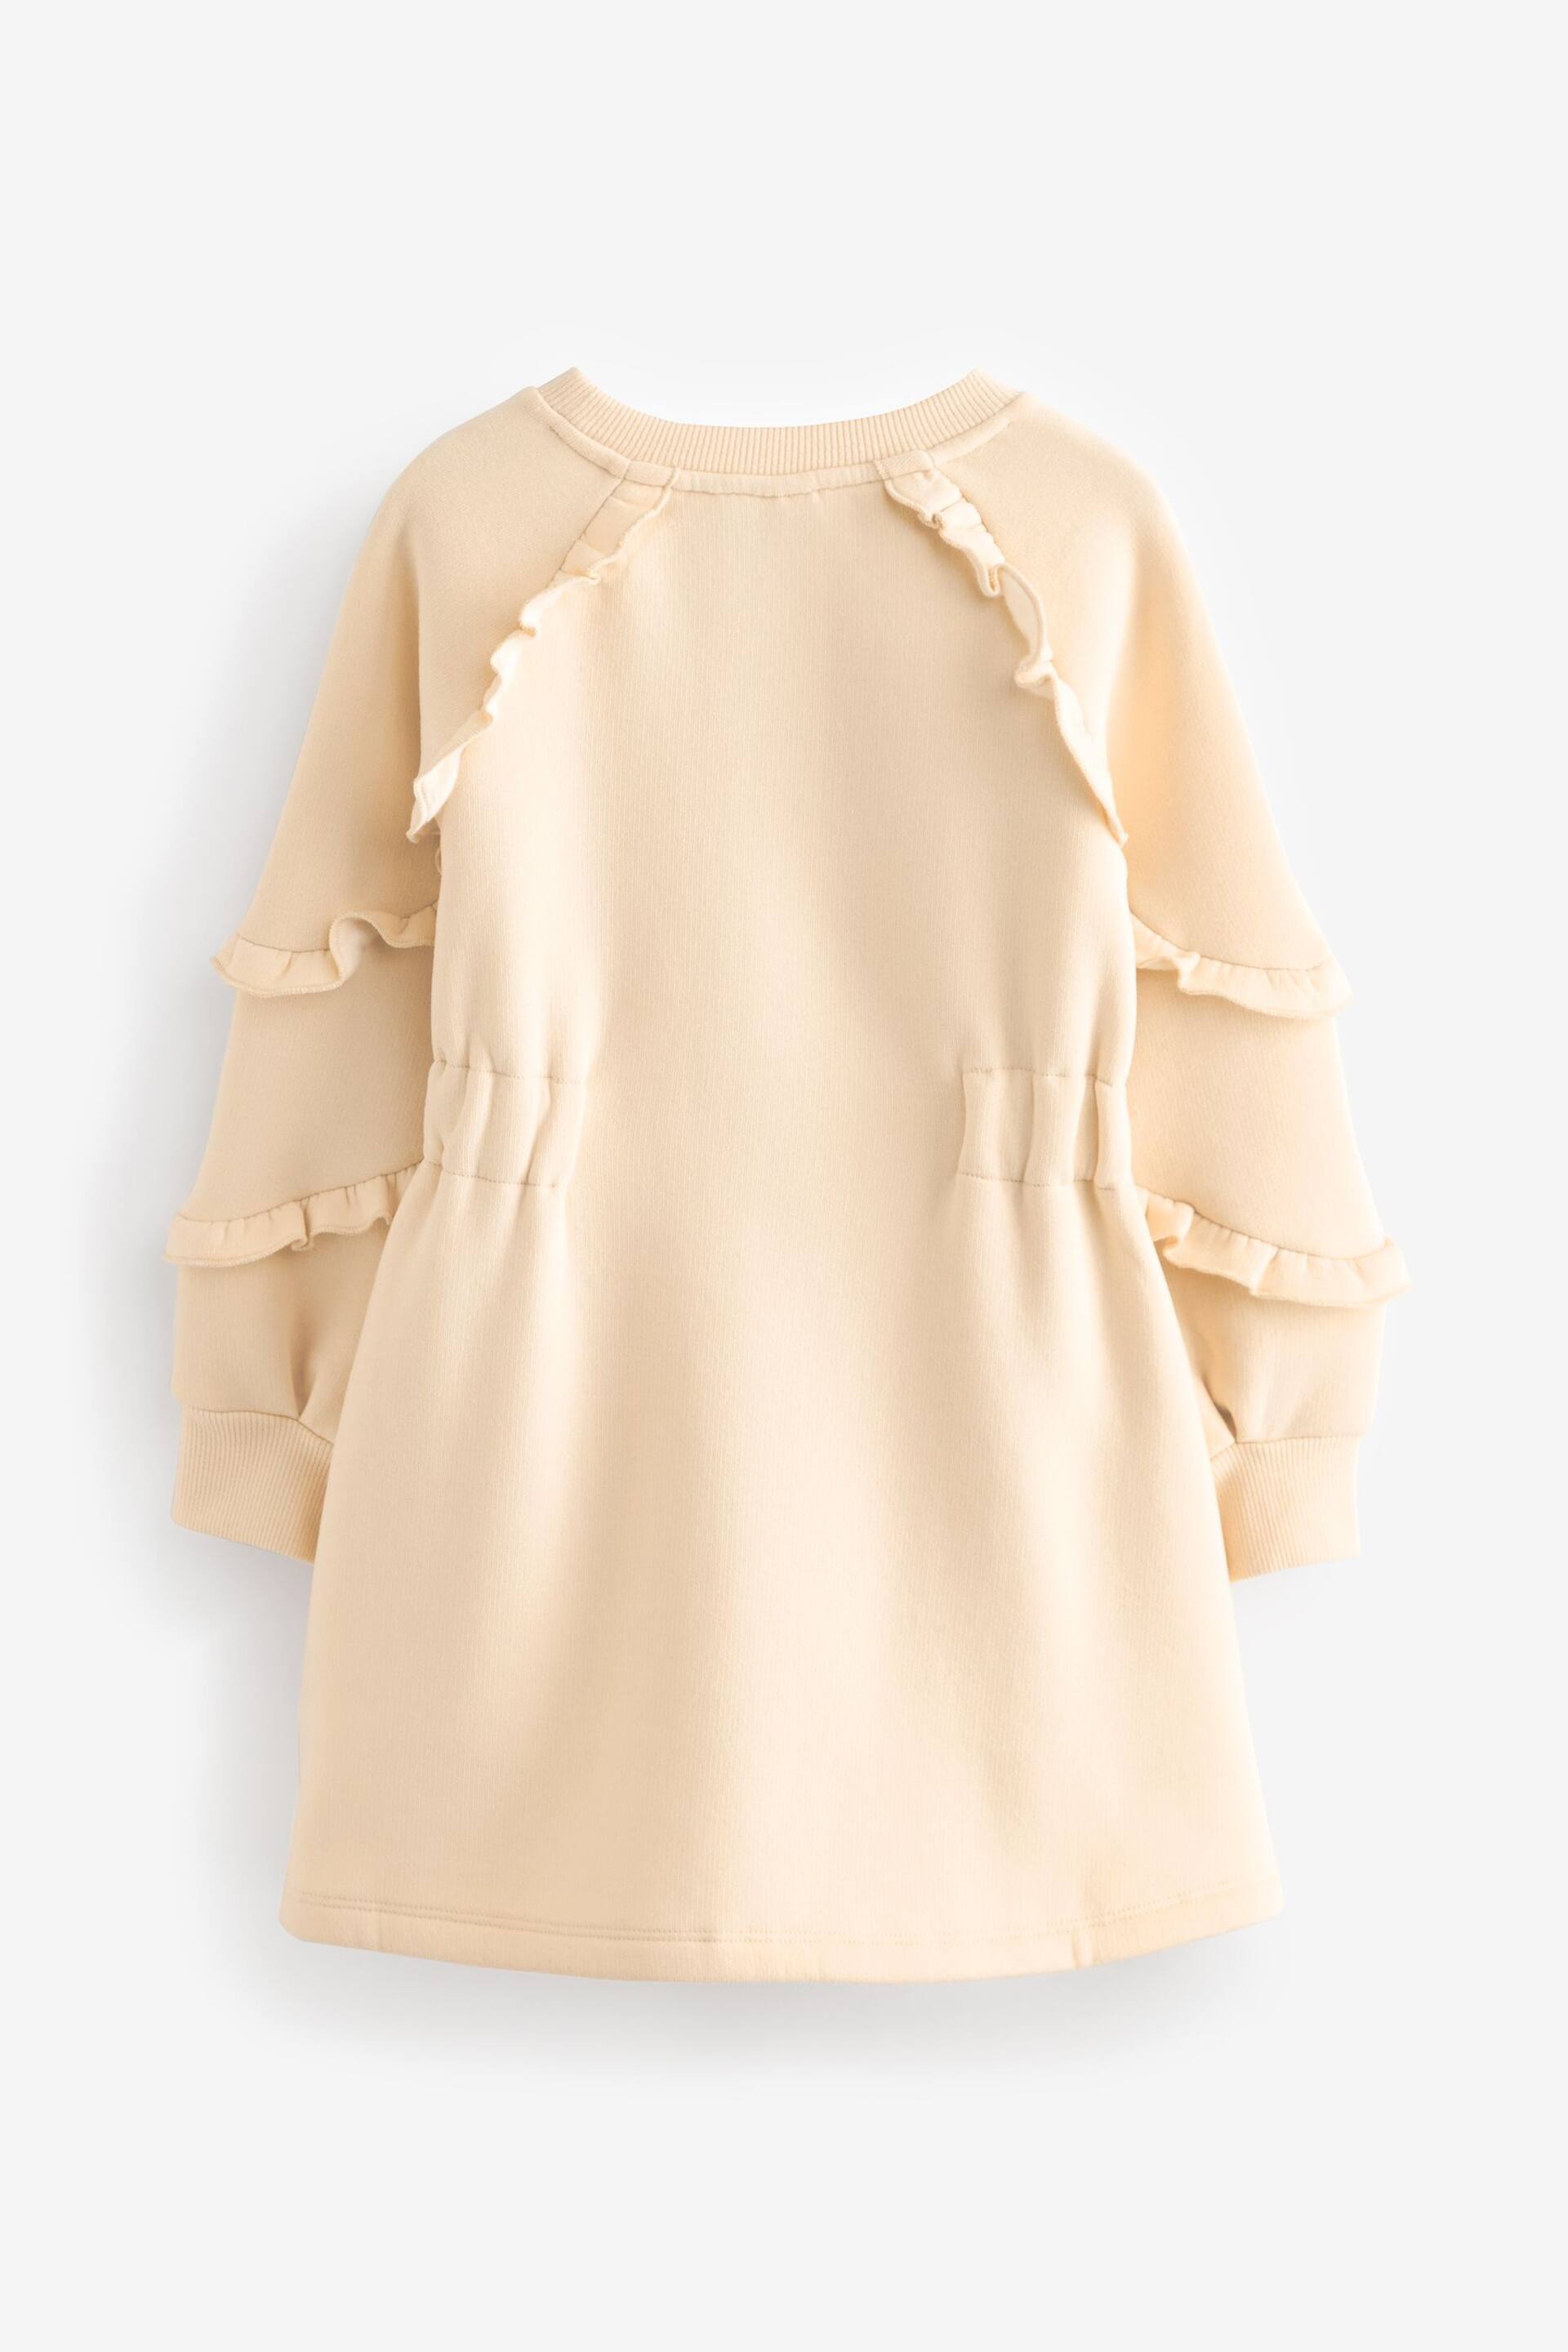 Baker by Ted Baker Frilled Sweat Dress - Image 7 of 9